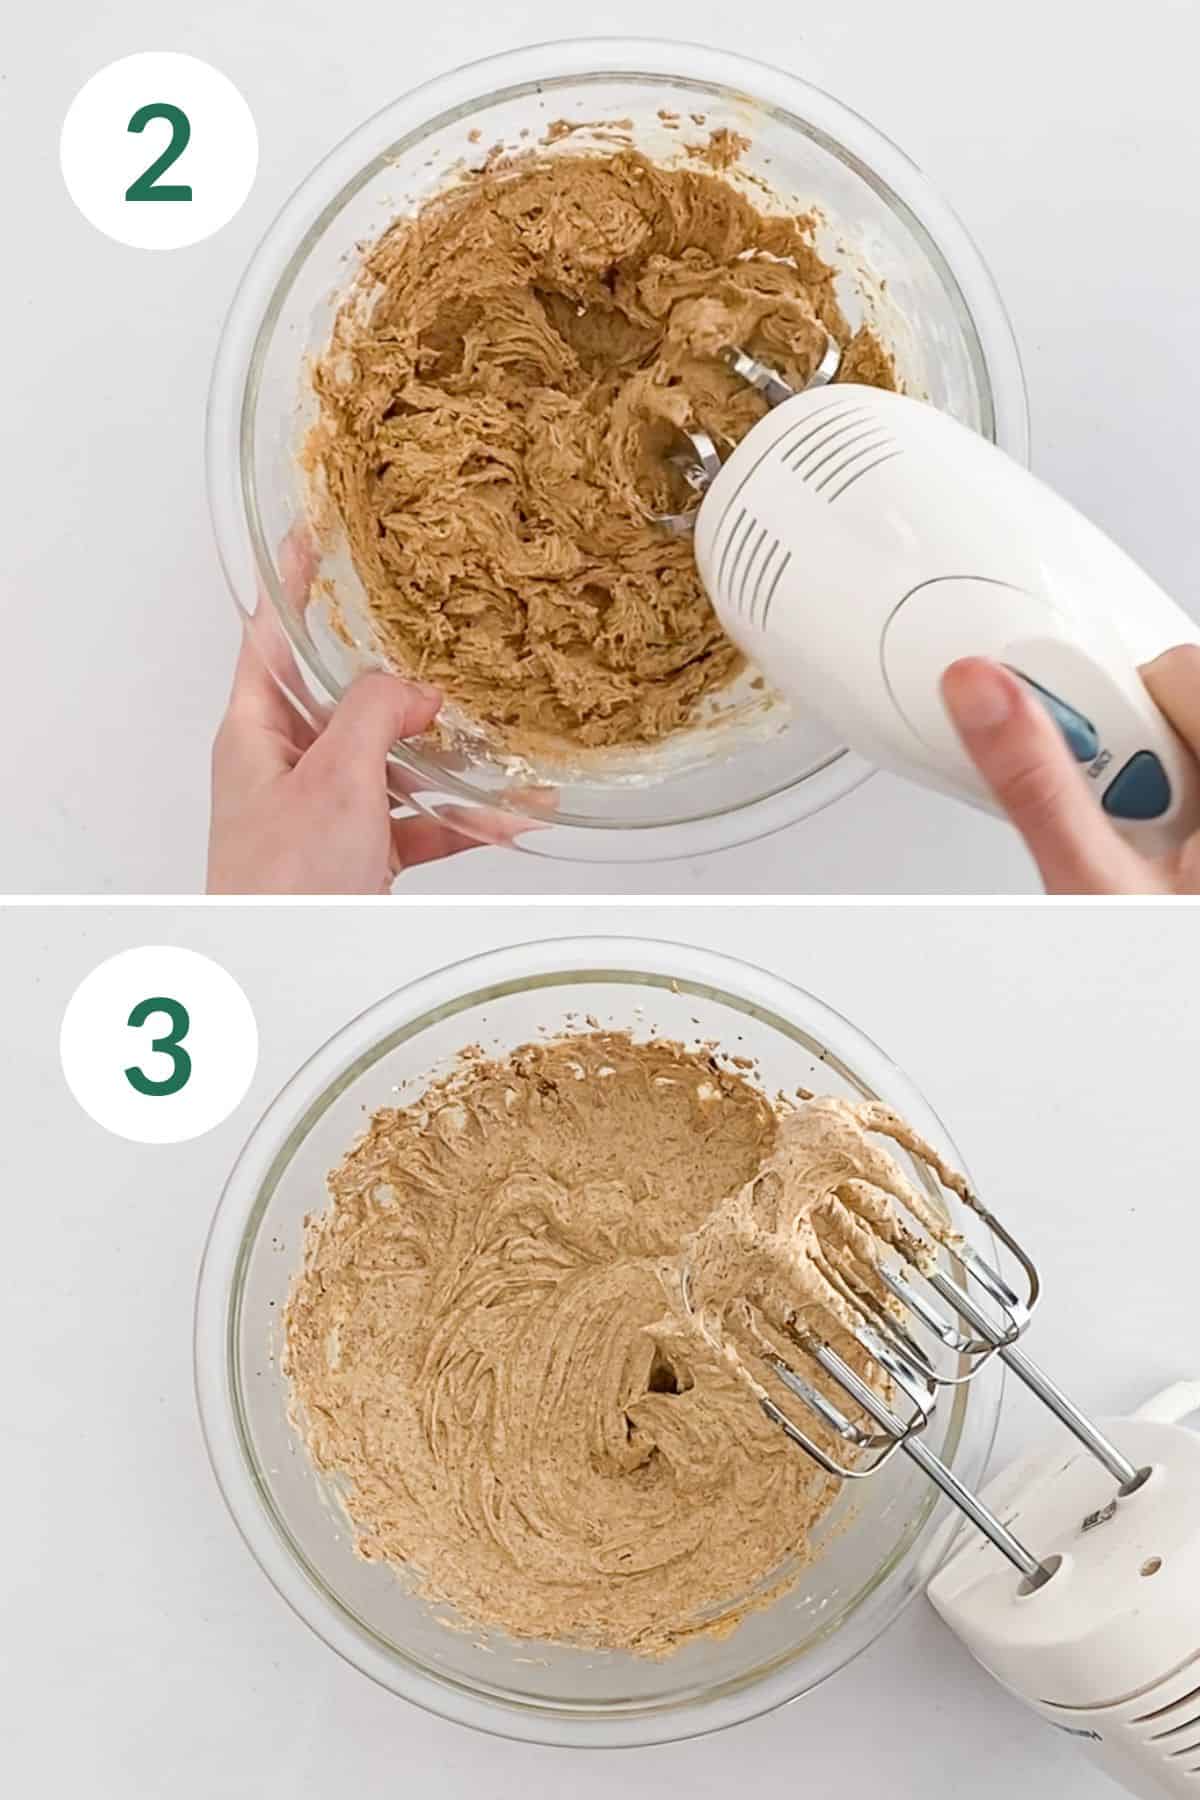 Mixing the butter and sugar with an electric mixer, and then adding in the dry ingredients.